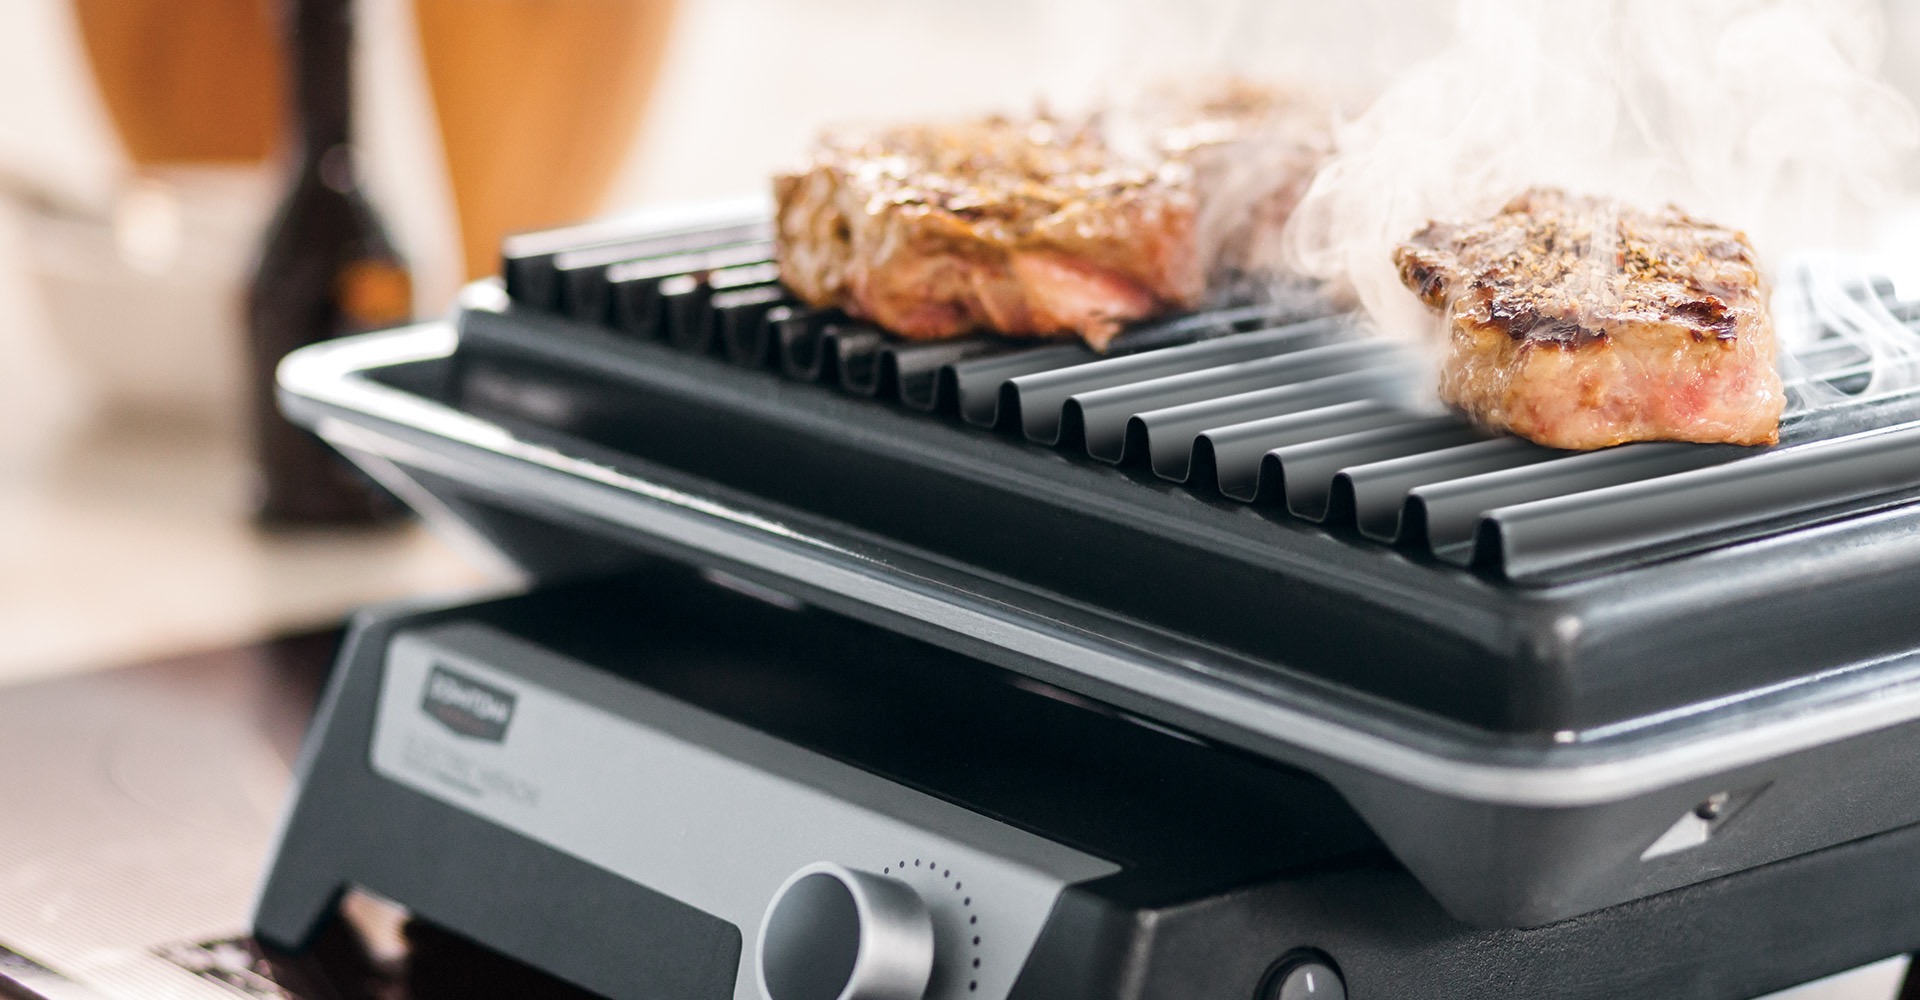 George Foreman 1600-Watt Silver Electric Grill in the Electric